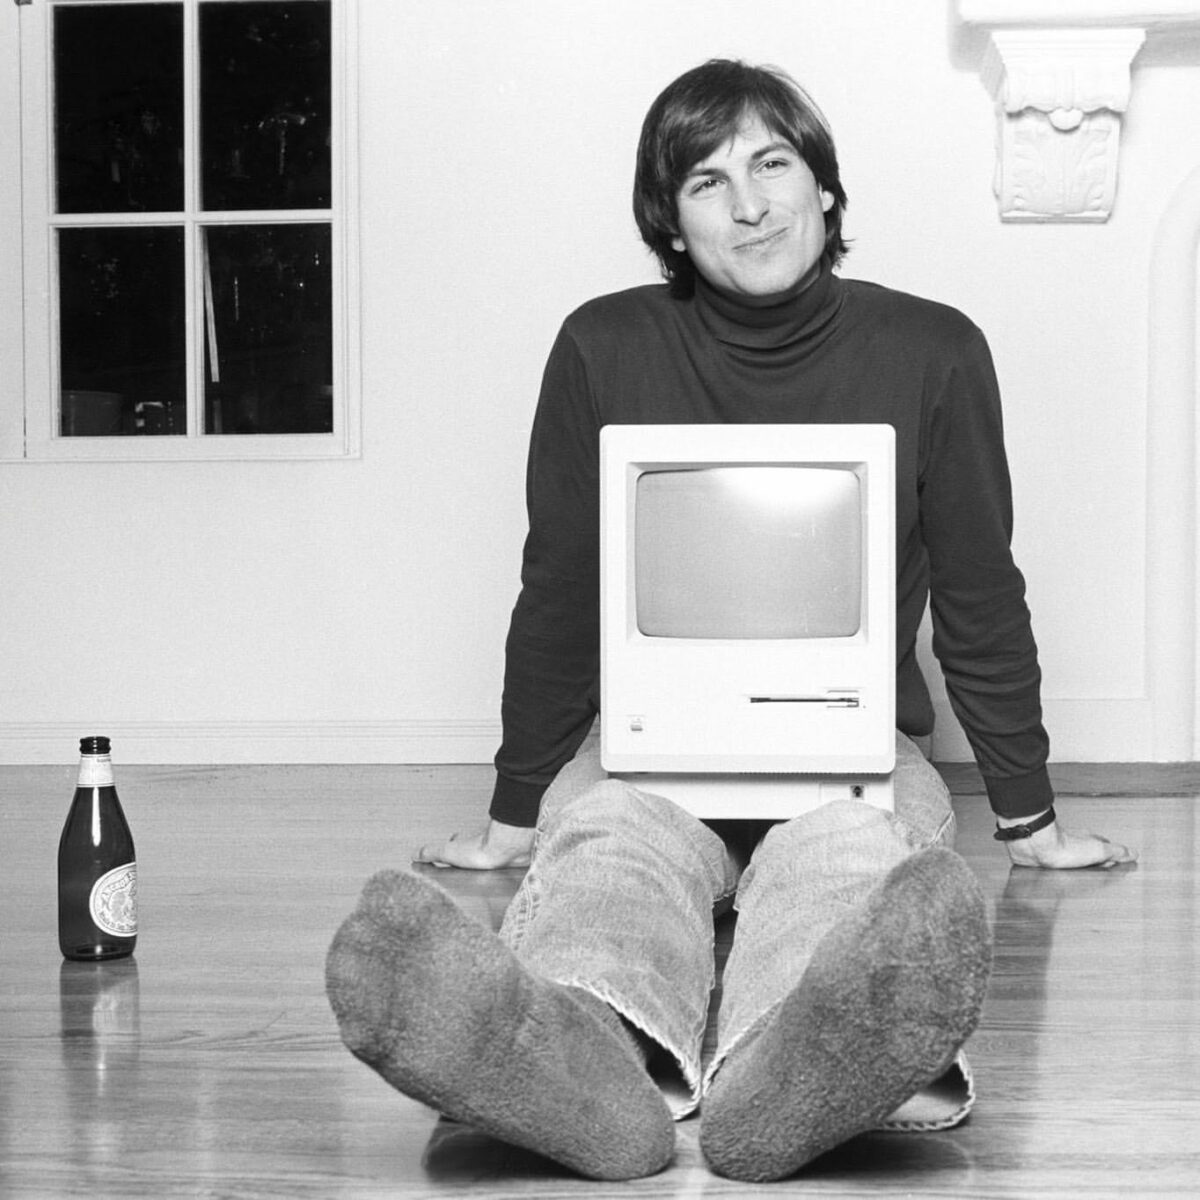 Image credit Steve Jobs with a Macintosh computer, introduced in 1984 Magnolia Pictures